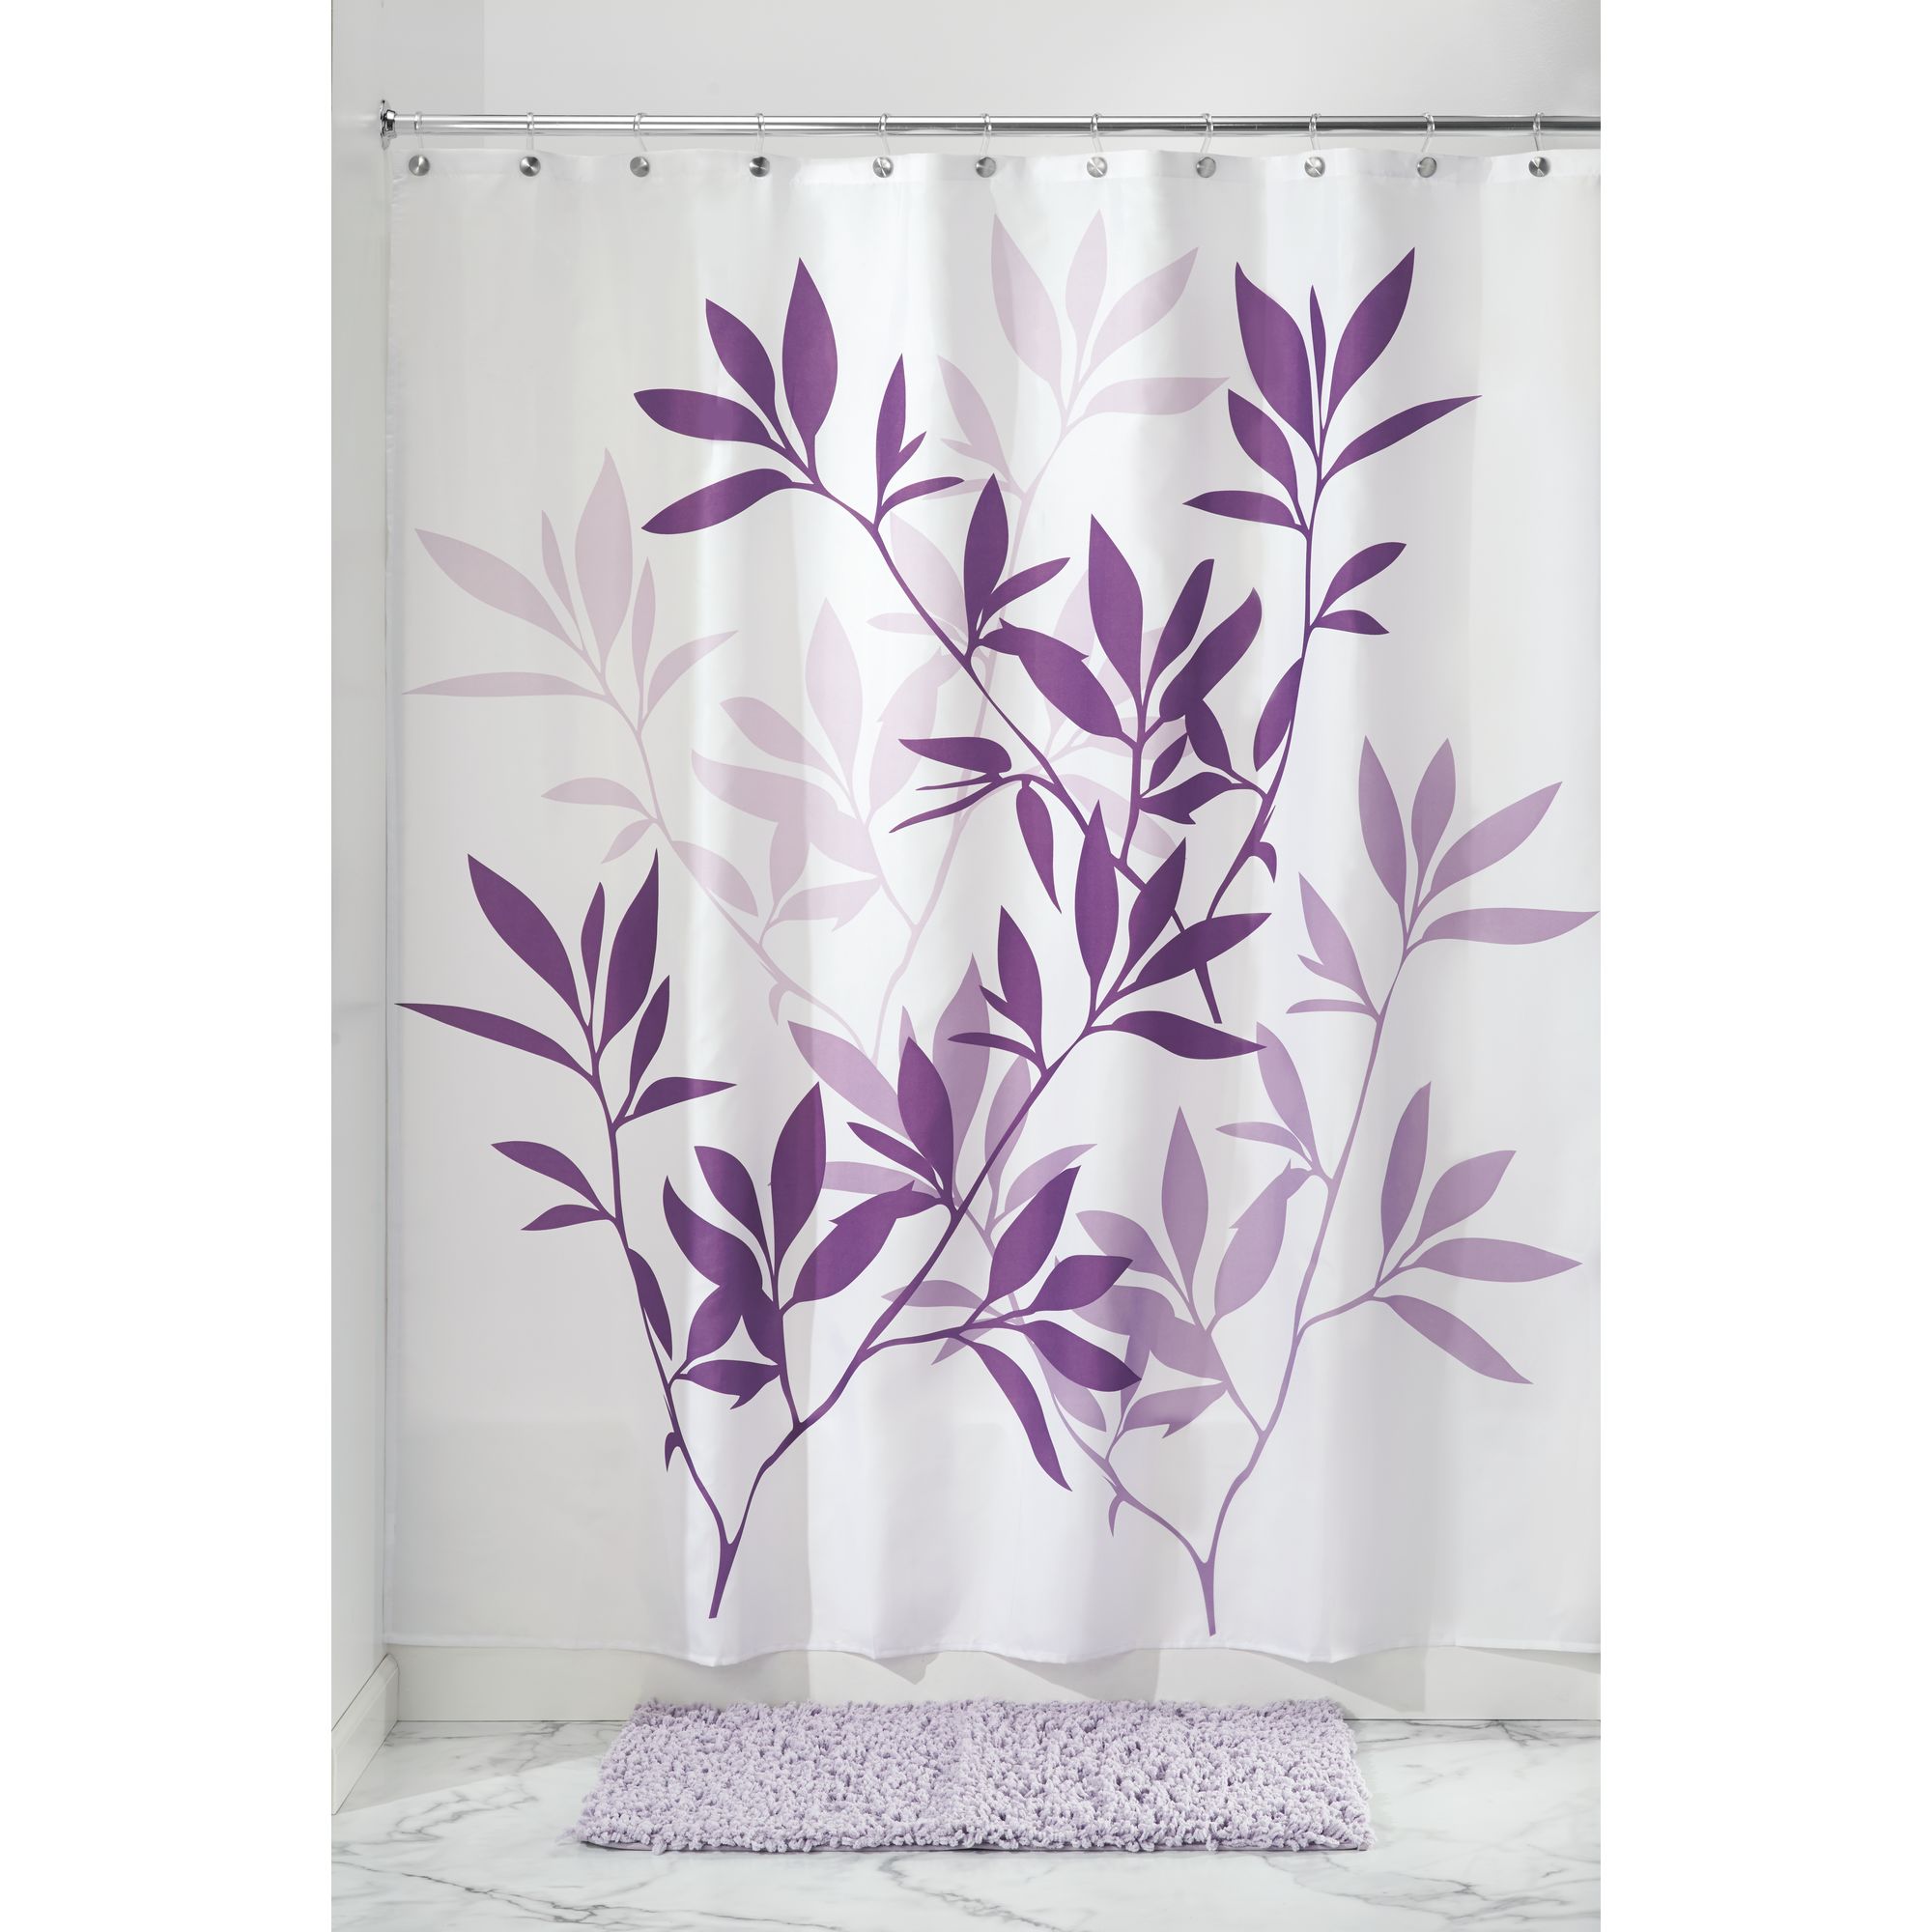 InterDesign Purple Trees Polyester Shower Curtain, 72" x 72" - image 4 of 5